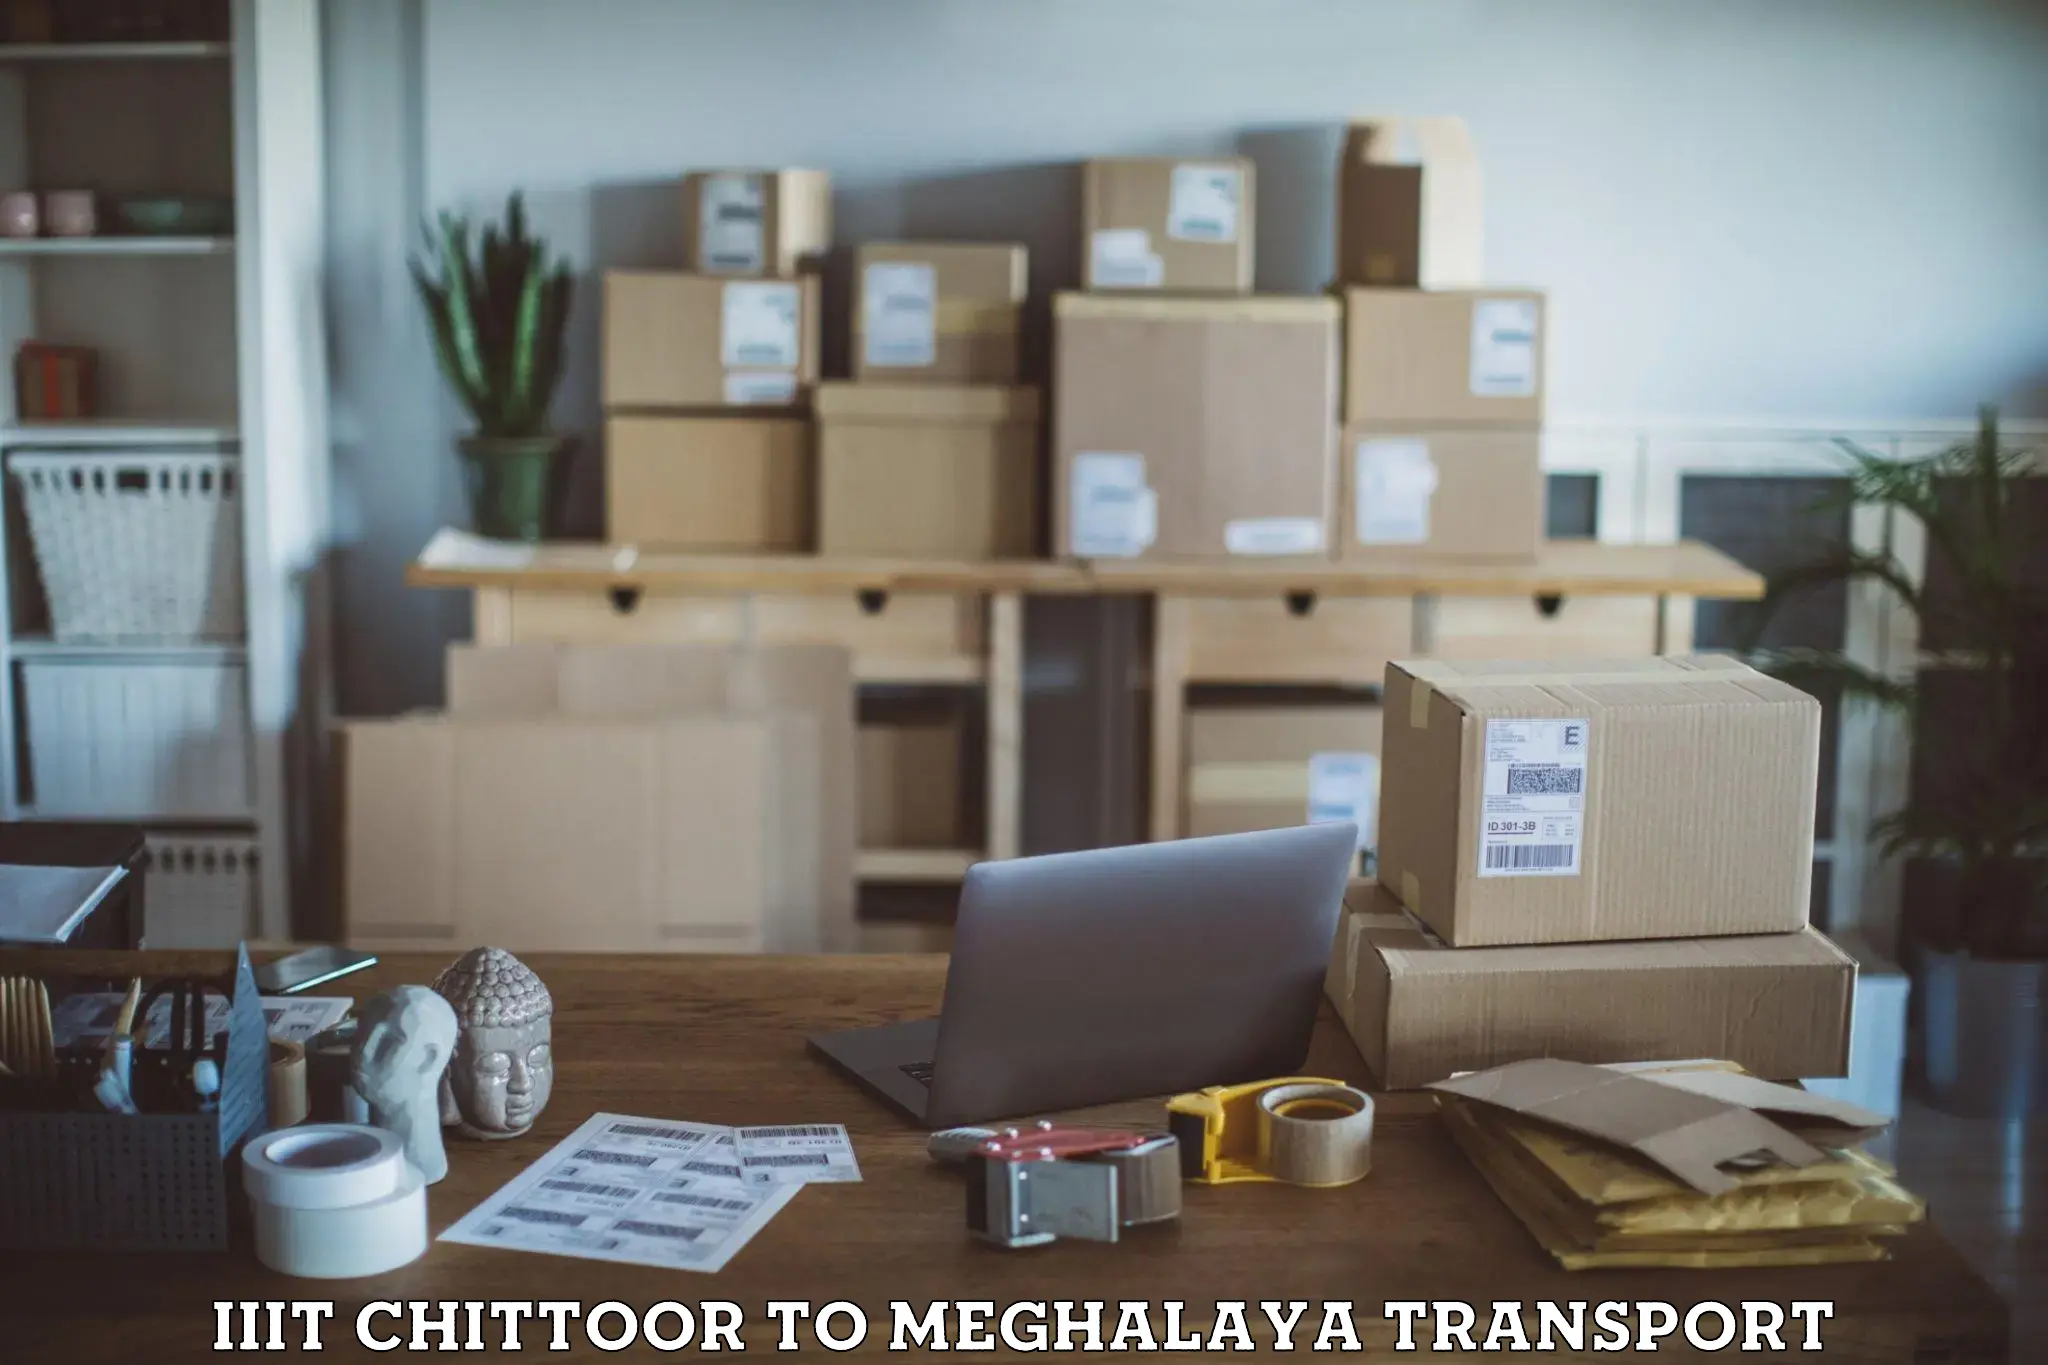 Interstate transport services IIIT Chittoor to Shillong